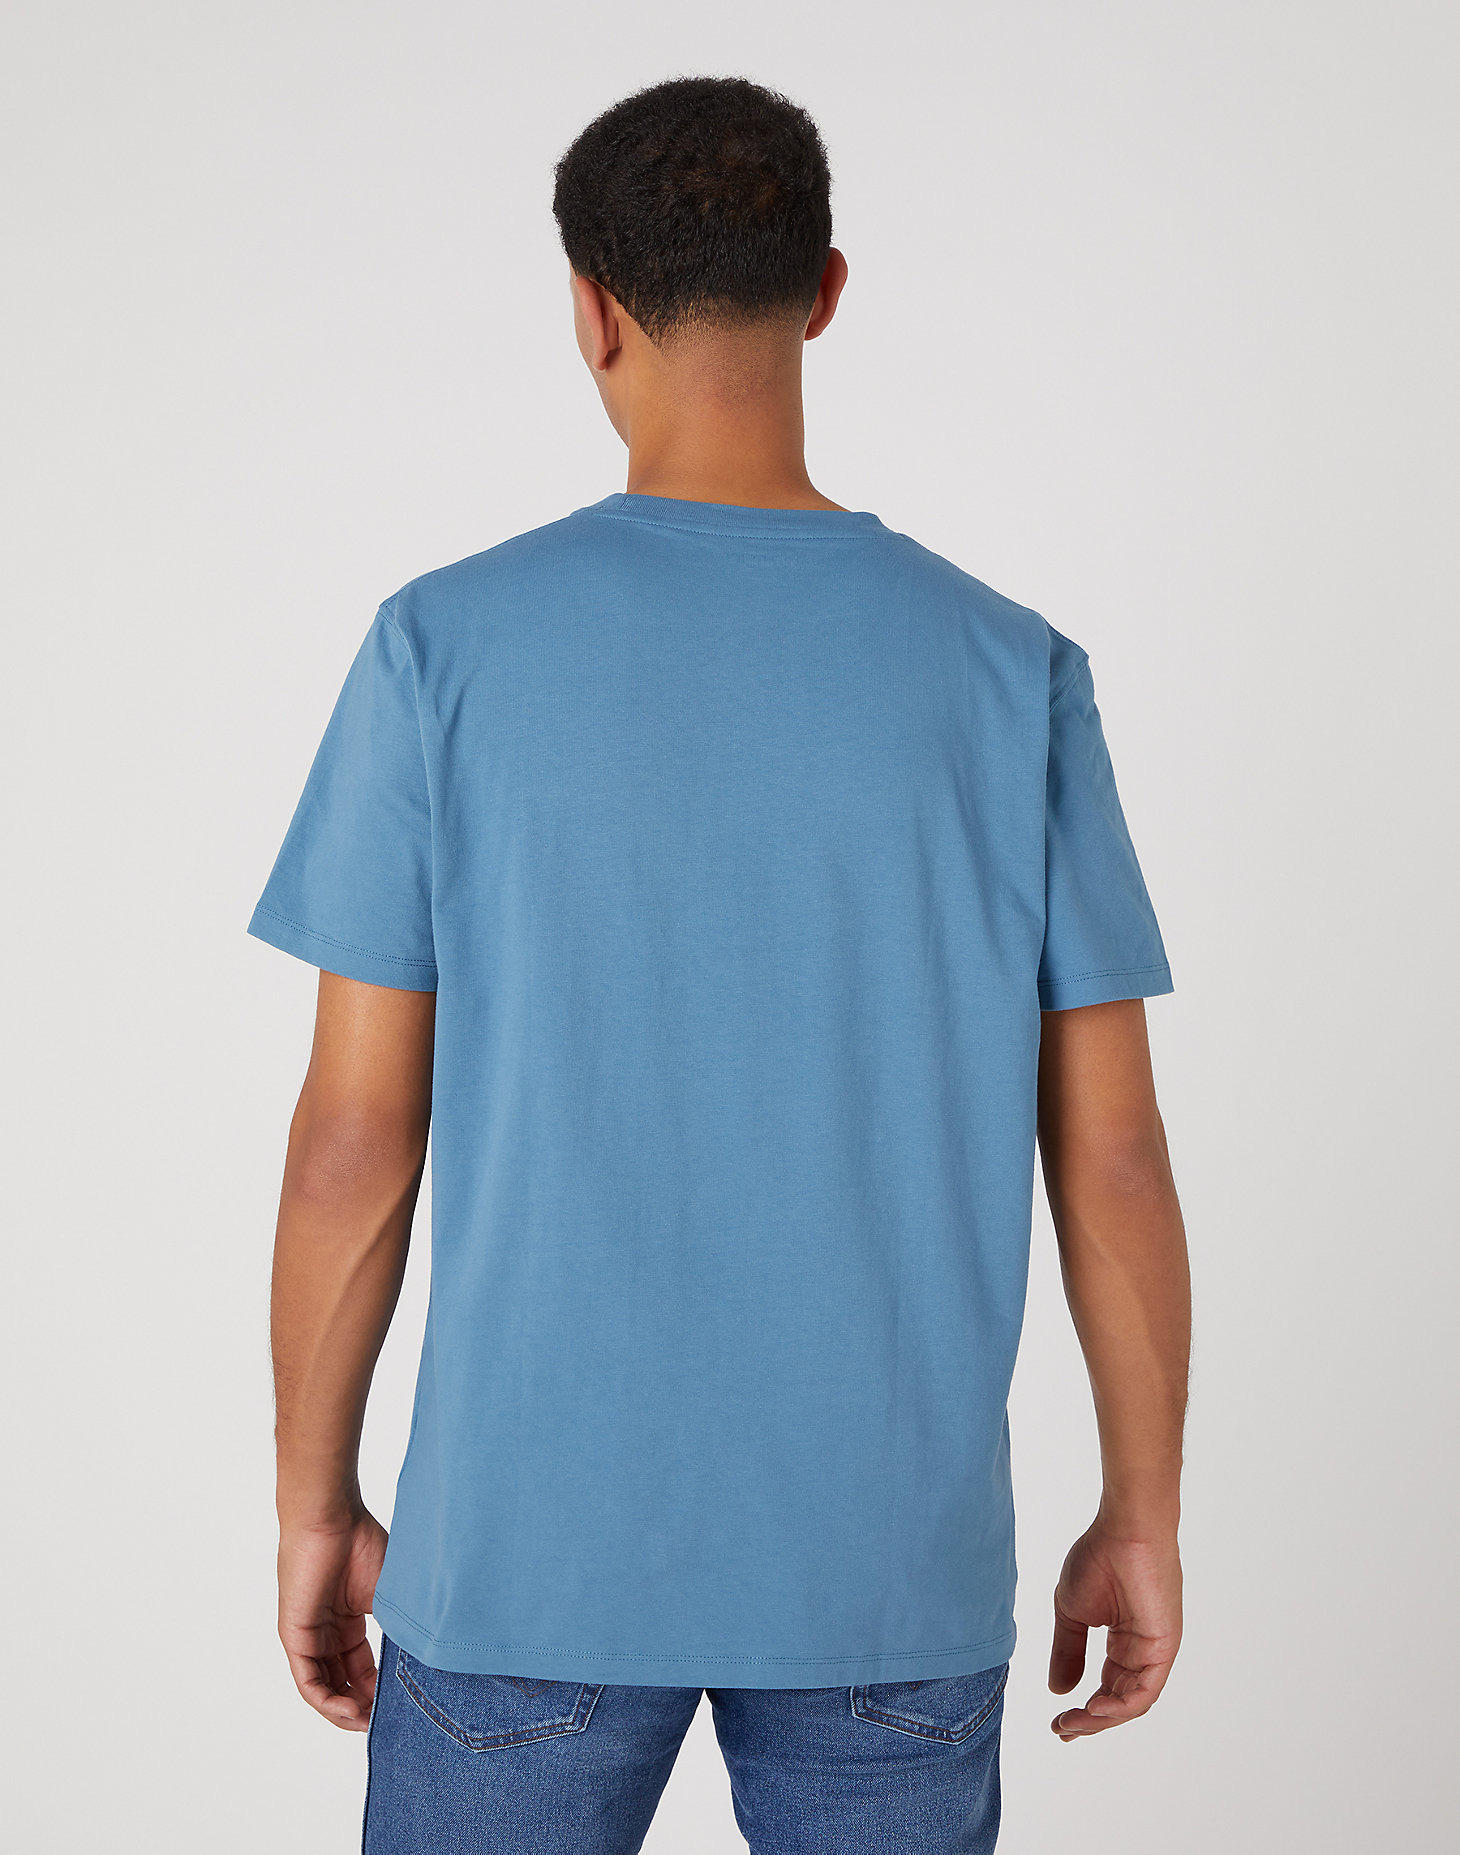 Logo Tee in Captains Blue alternative view 2